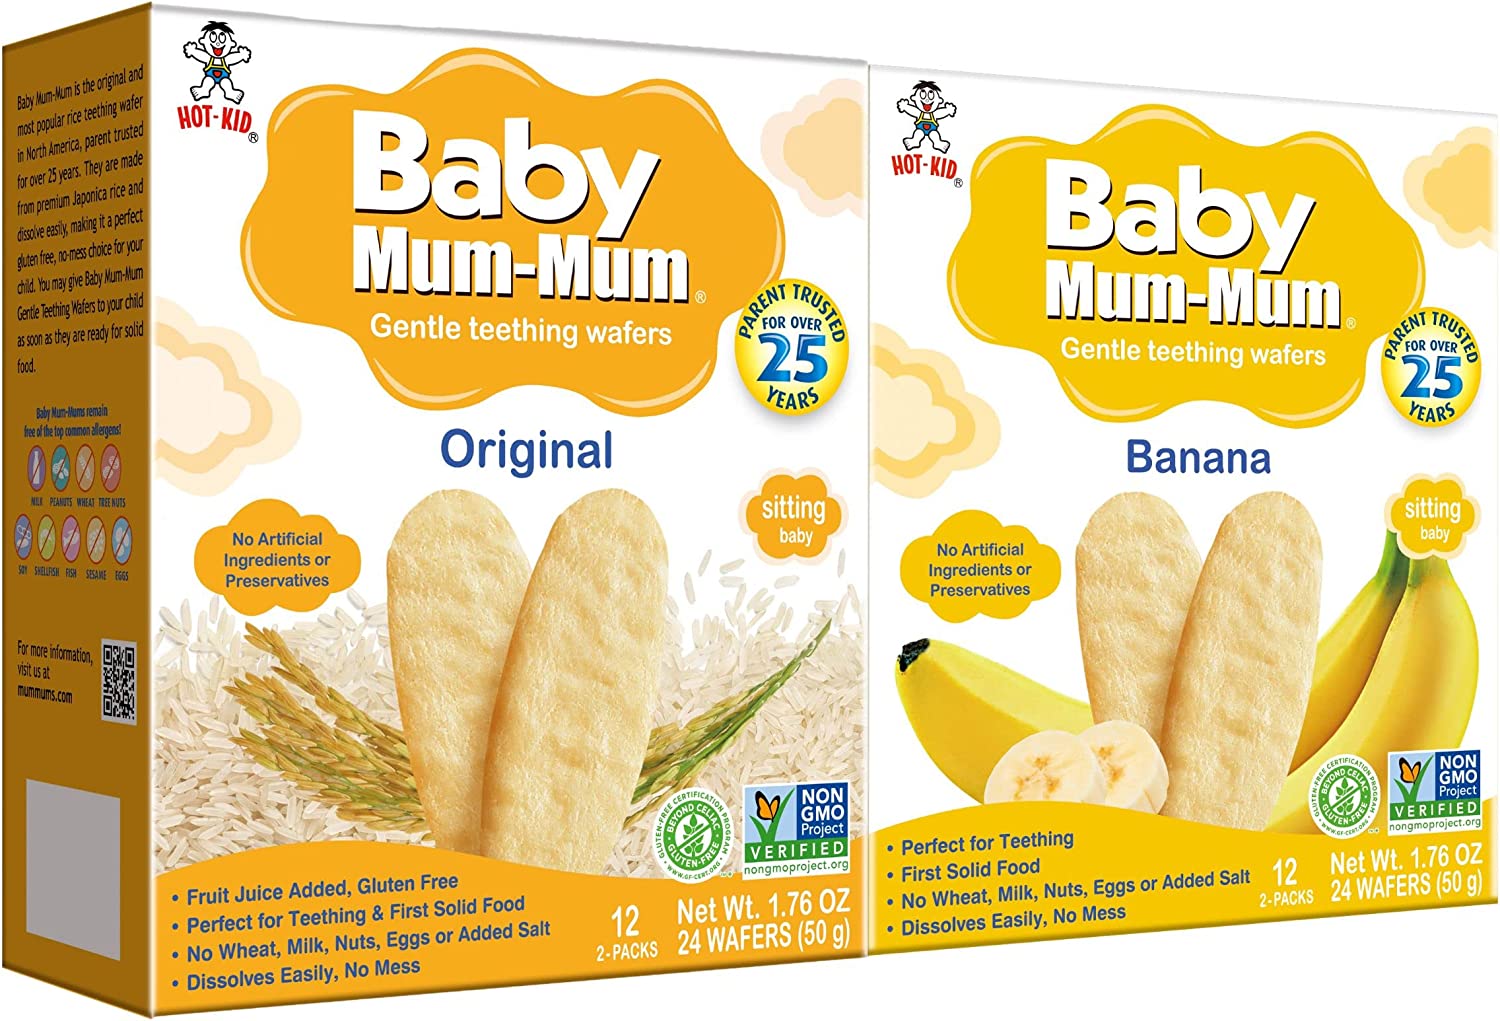 Baby Mum-Mum Rice Rusks, 2 Flavor Variety Pack, 24 Pieces (Pack of 4) 2 Each: Banana, Original Gluten Free, Allergen Free, Non-GMO, Rice Teether Cookie for Teething Infants